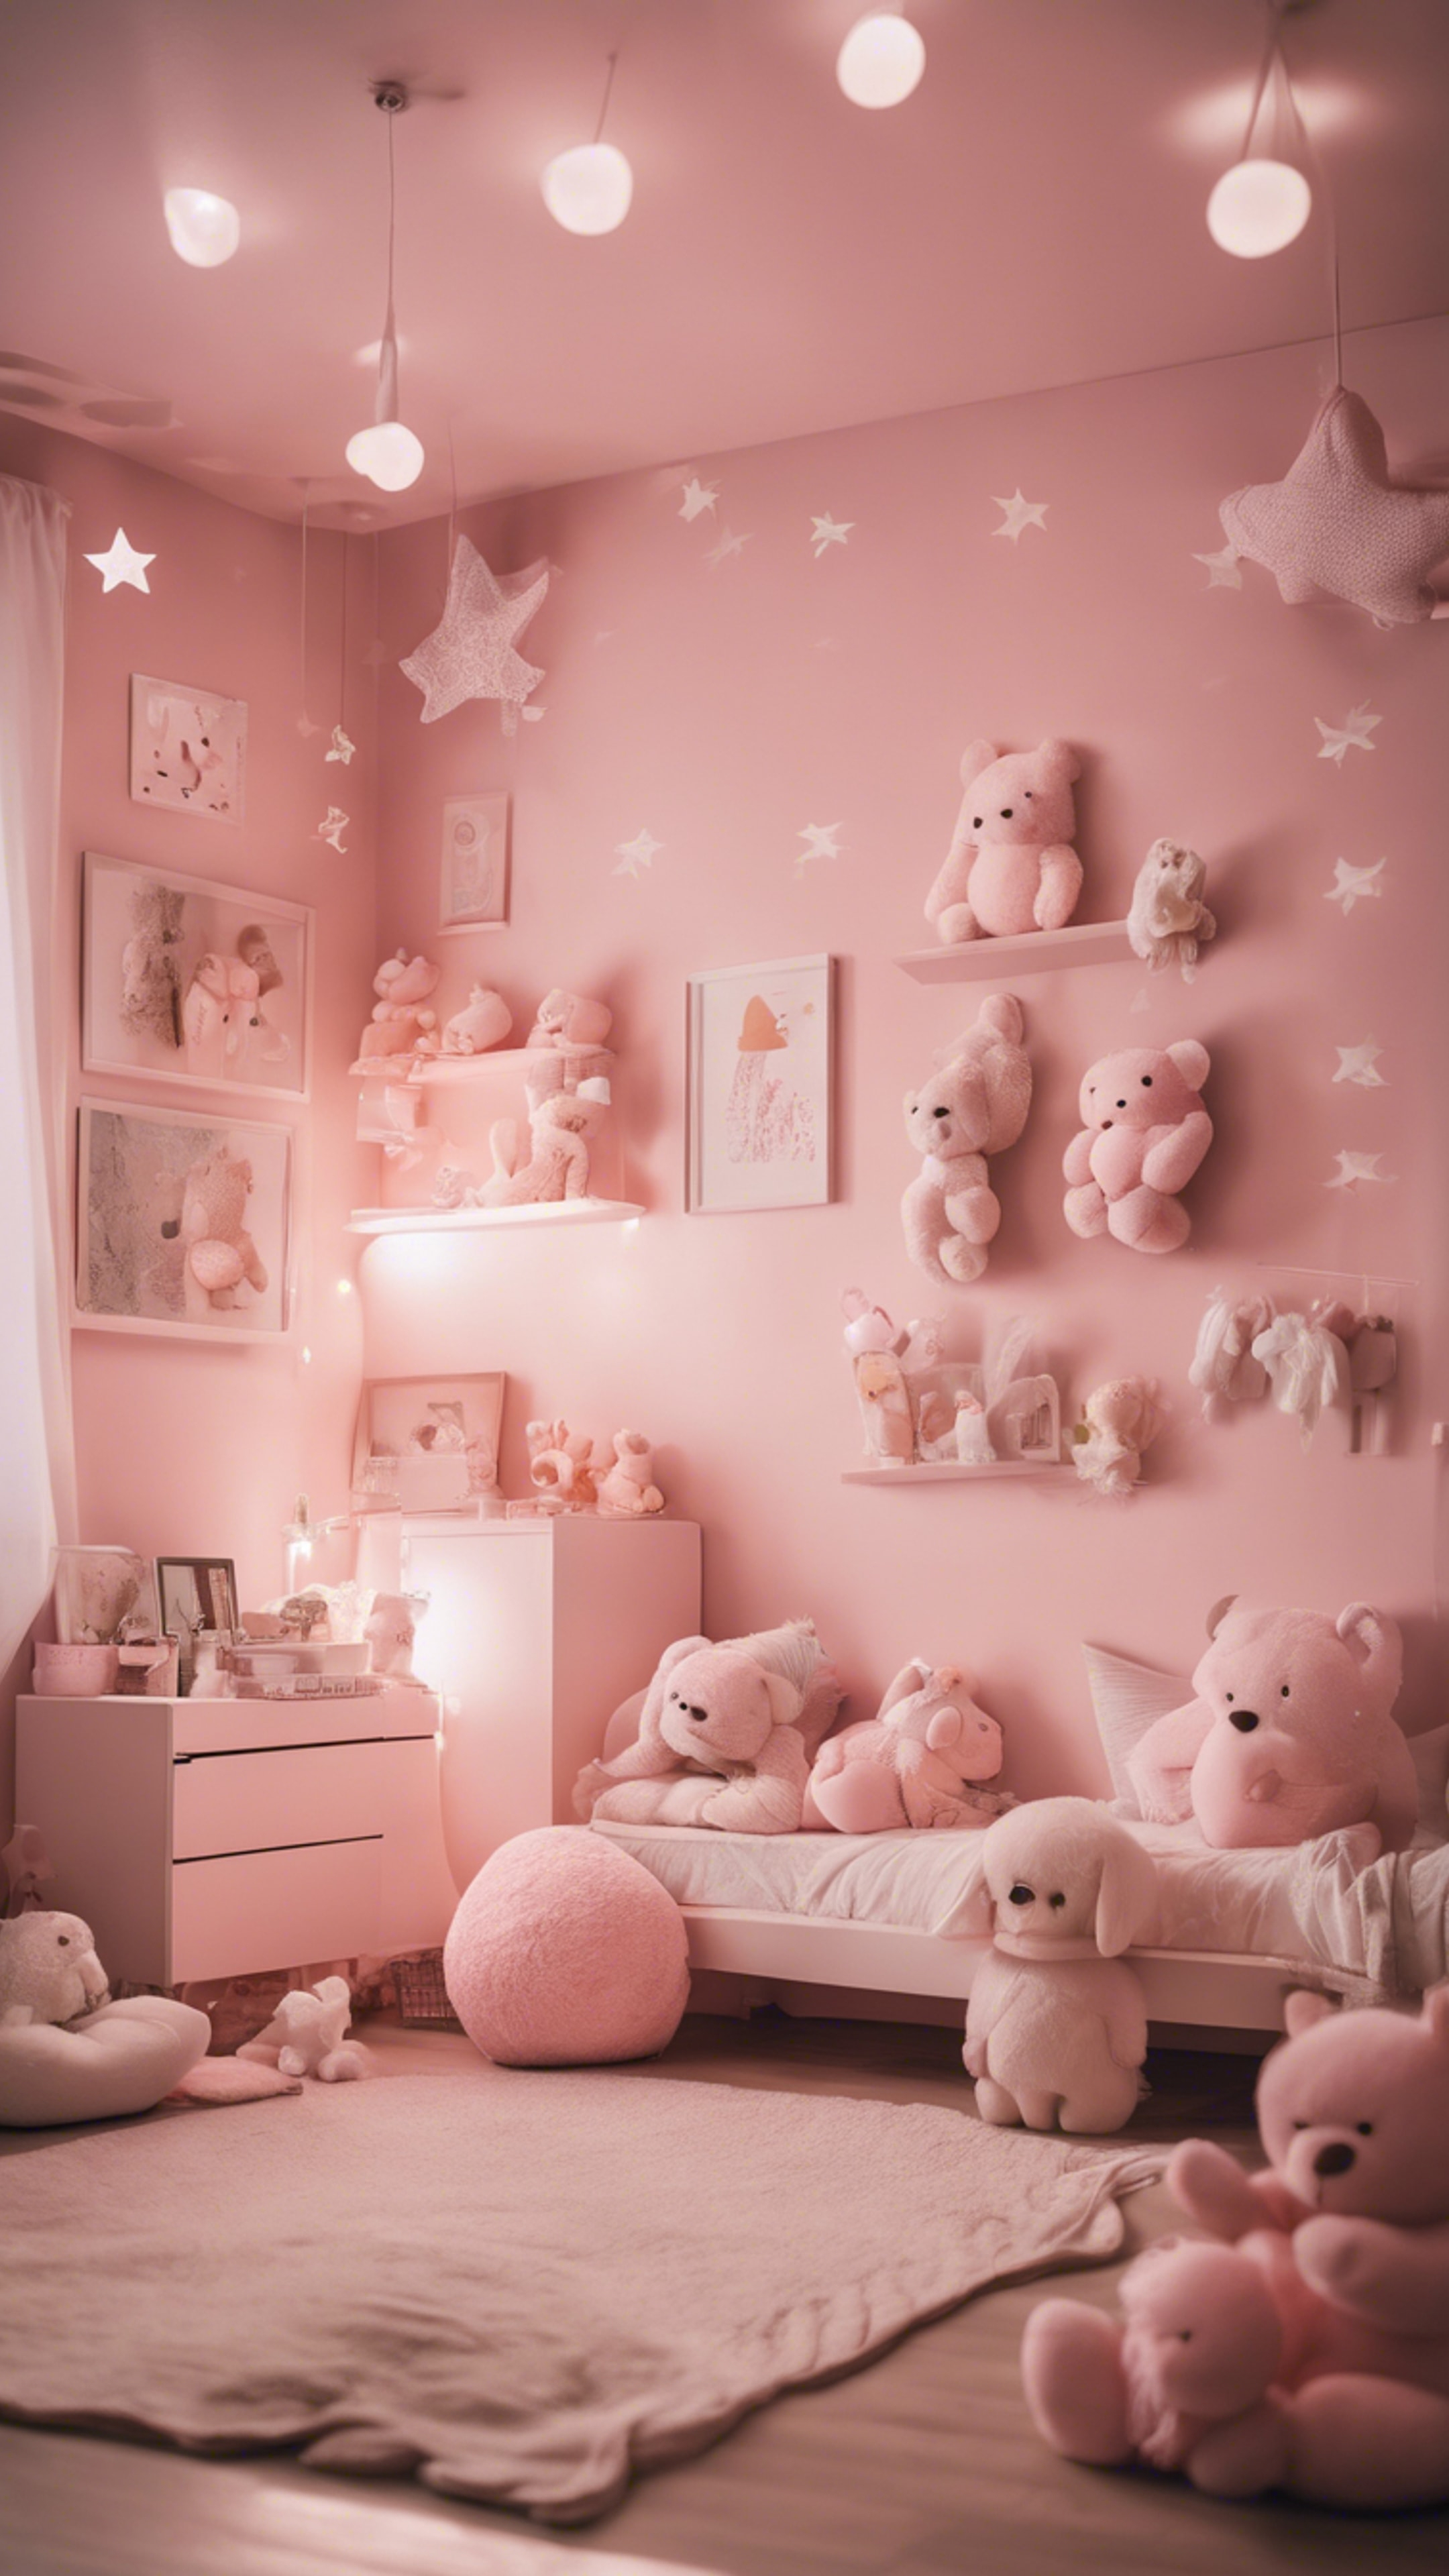 A child's bedroom designed in light pink Kawaii theme, with fluffy stuffed animals and stars. Tapeta[1c682dae9a5849159ddf]